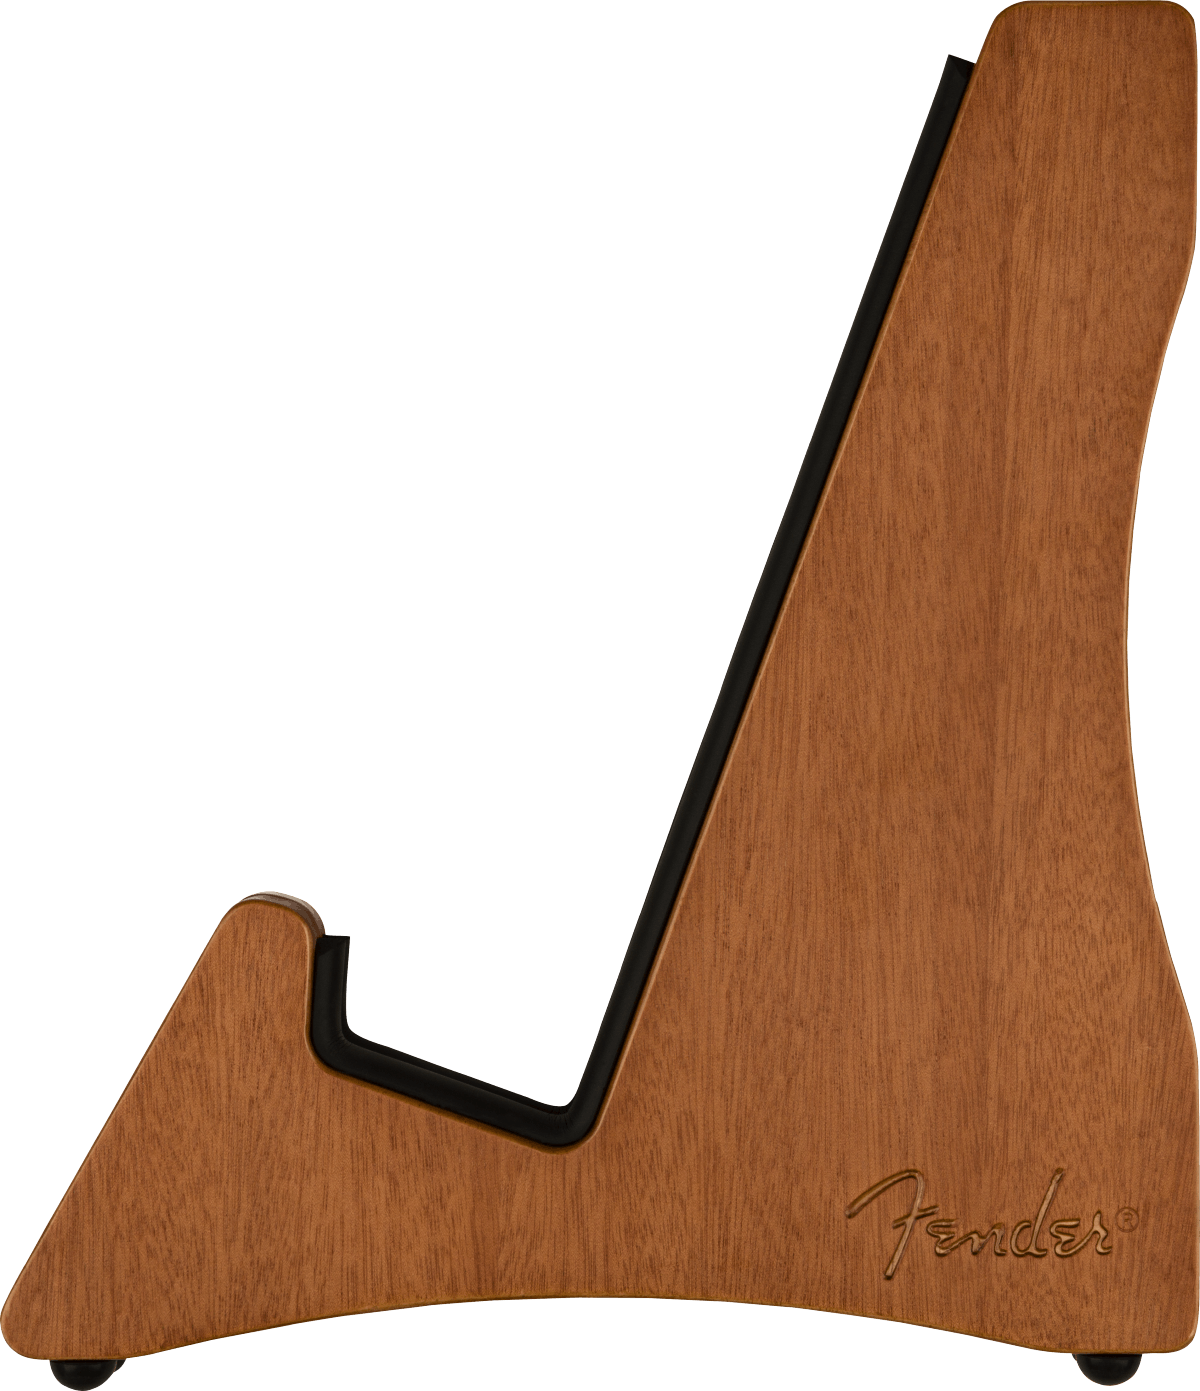 fender-timberframe-electric-guitar-stand-in-natural-andertons-music-co